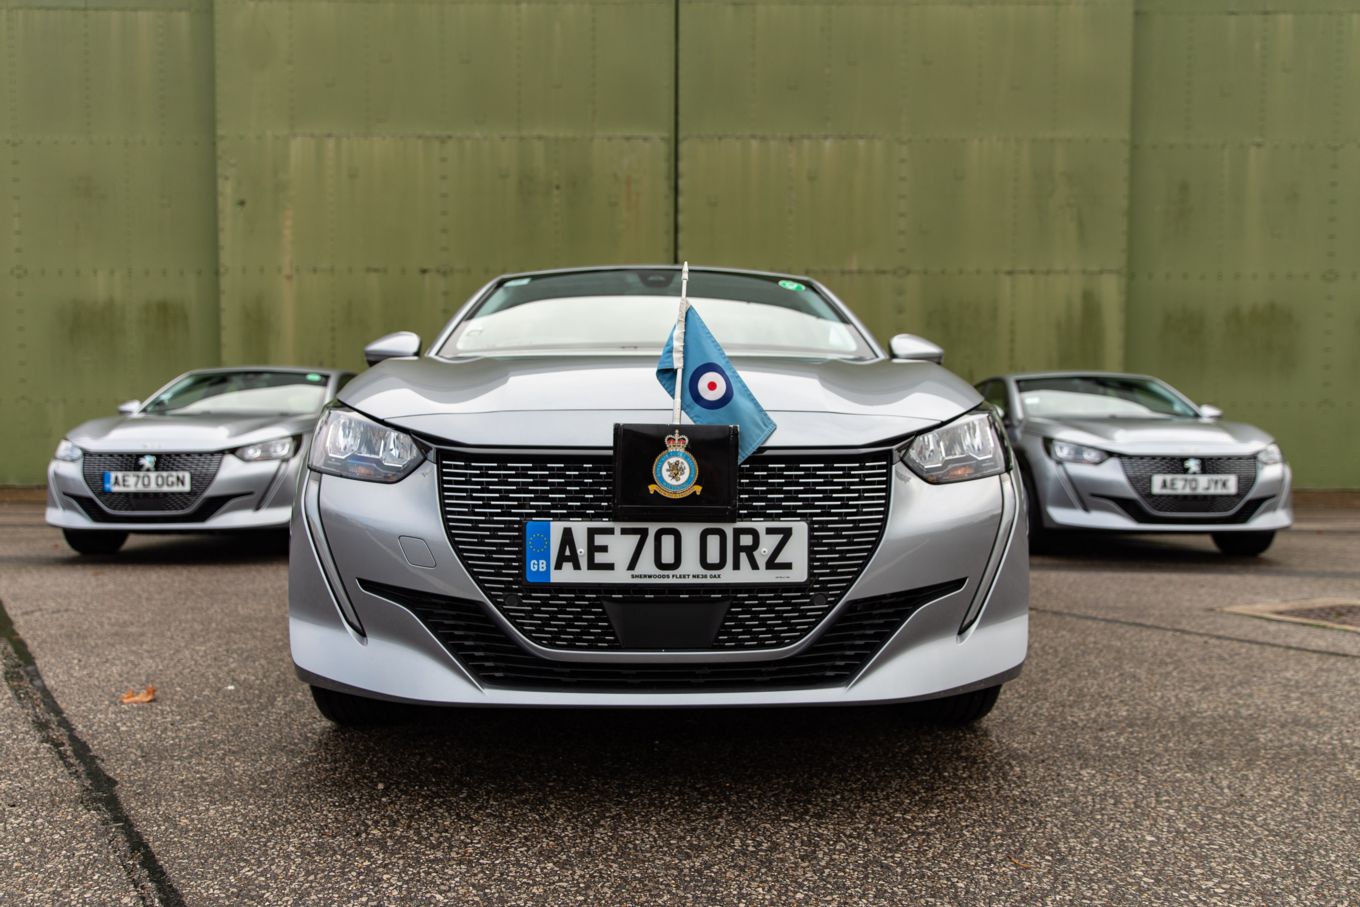 Image shows a close up of the front of one of the new Peugeot e-208 electric vehicles.